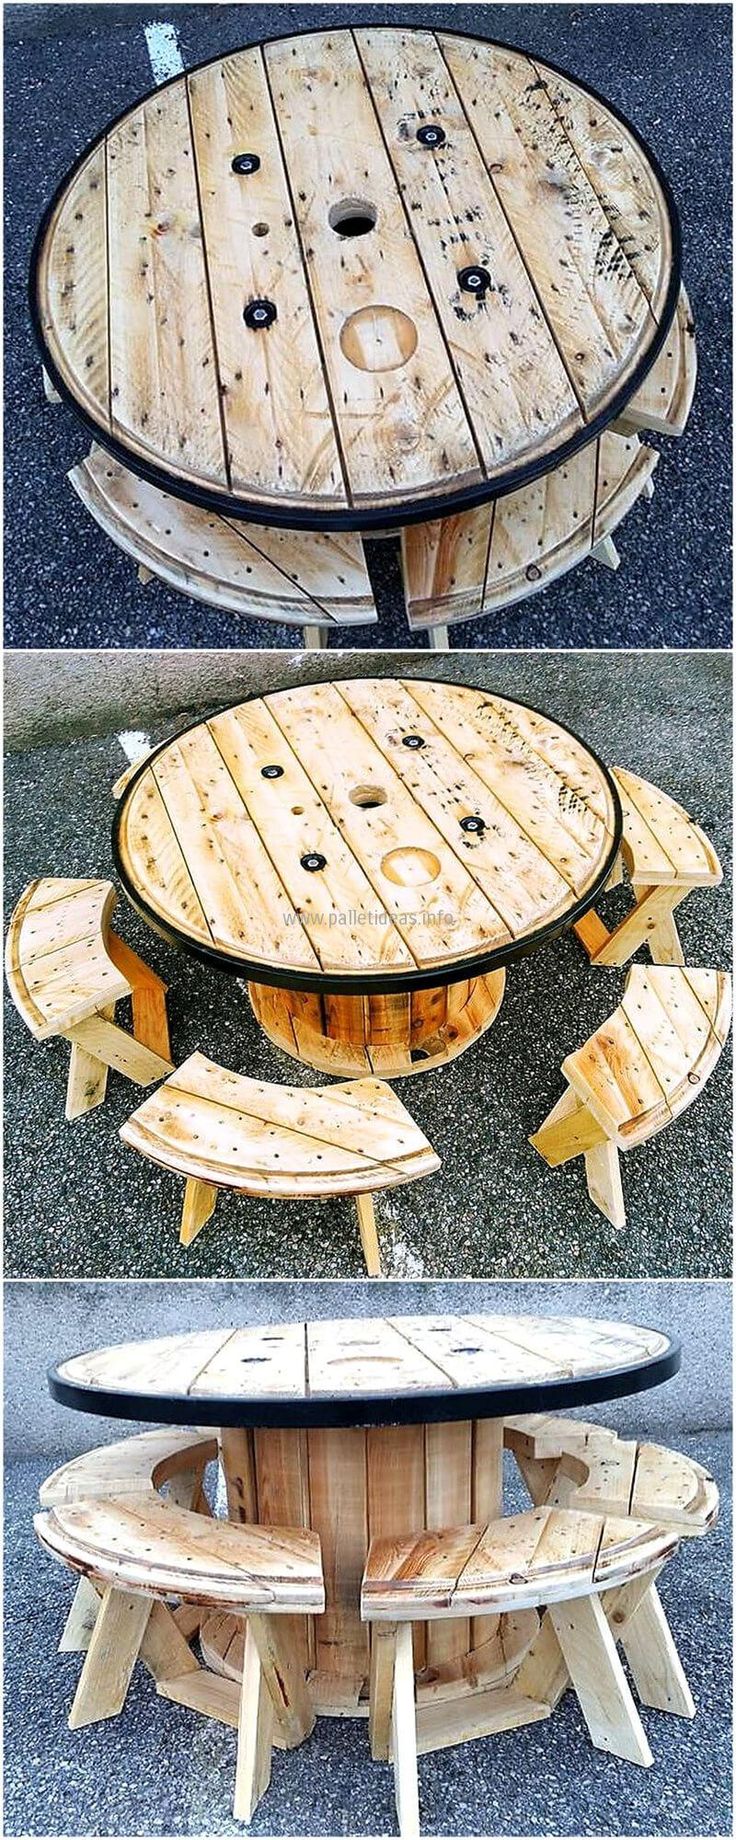 Diy Coffee Tables 8 - The Coolest DIY Coffee Tables Ideas